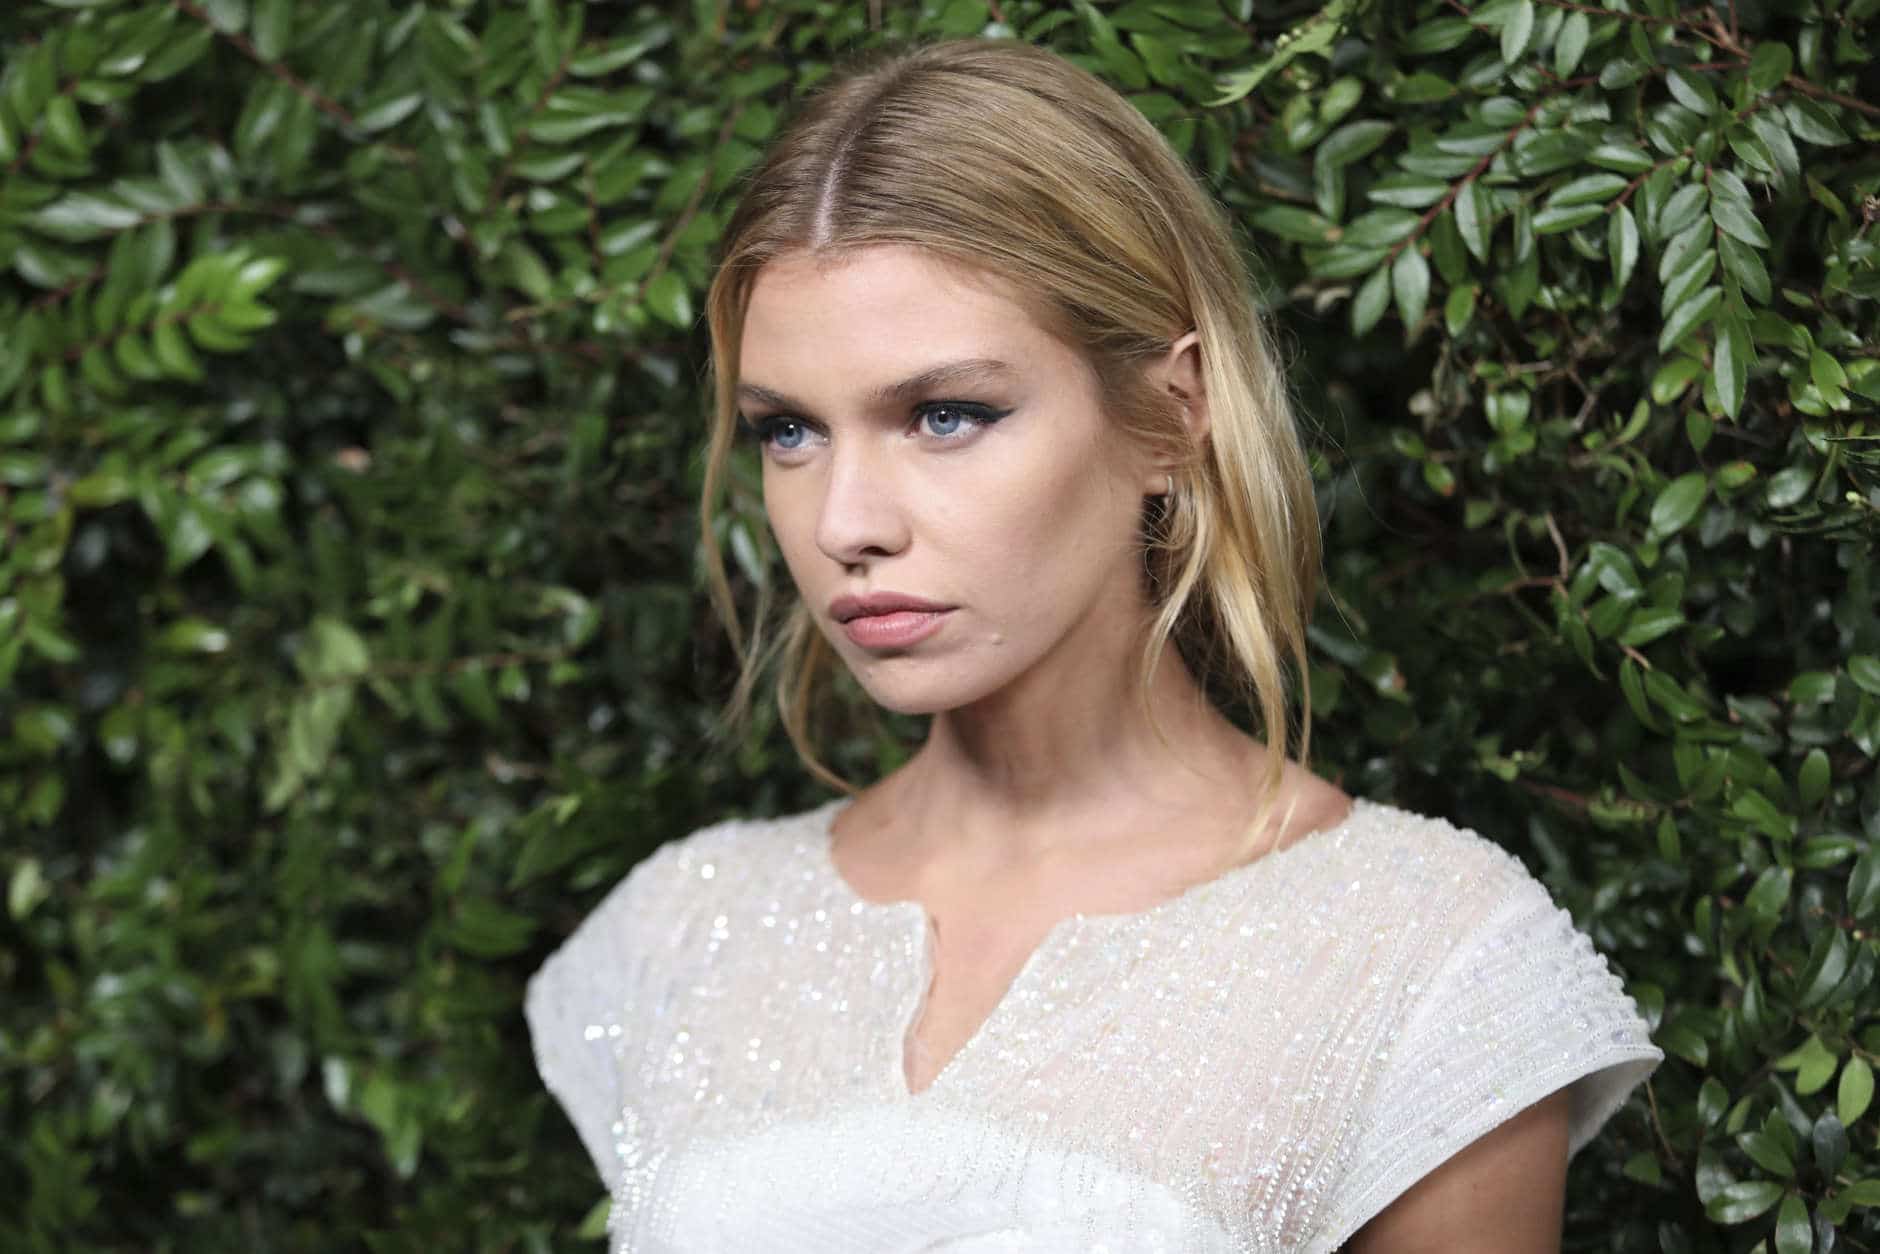 Stella Maxwell arrives at the CHANEL Pre-Oscar Dinner at Madeo Restaurant on Saturday, March 3, 2018, in Los Angeles. (Photo by Omar Vega/Invision/AP)